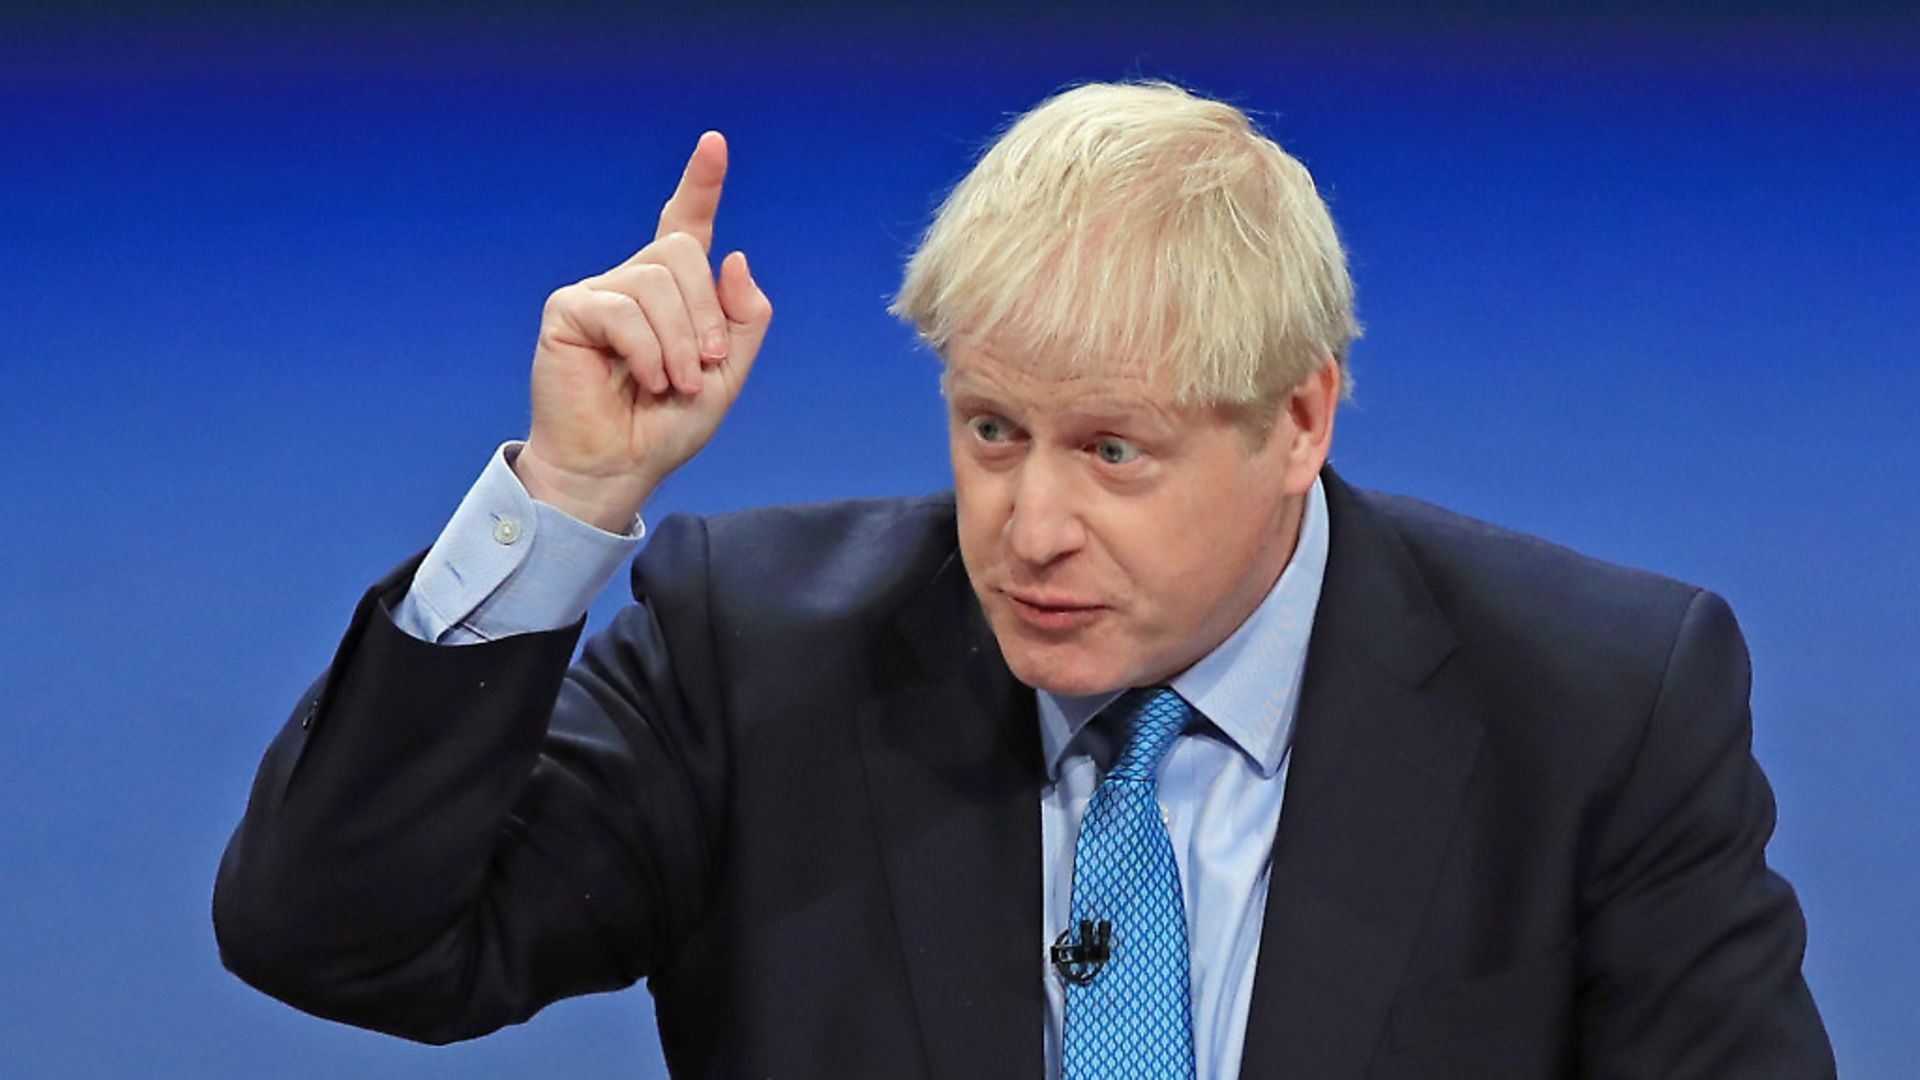 Boris Johnson delivering his speech at the Conservative Party Conference. Photograph: Peter Byrne/PA. - Credit: PA Wire/PA Images